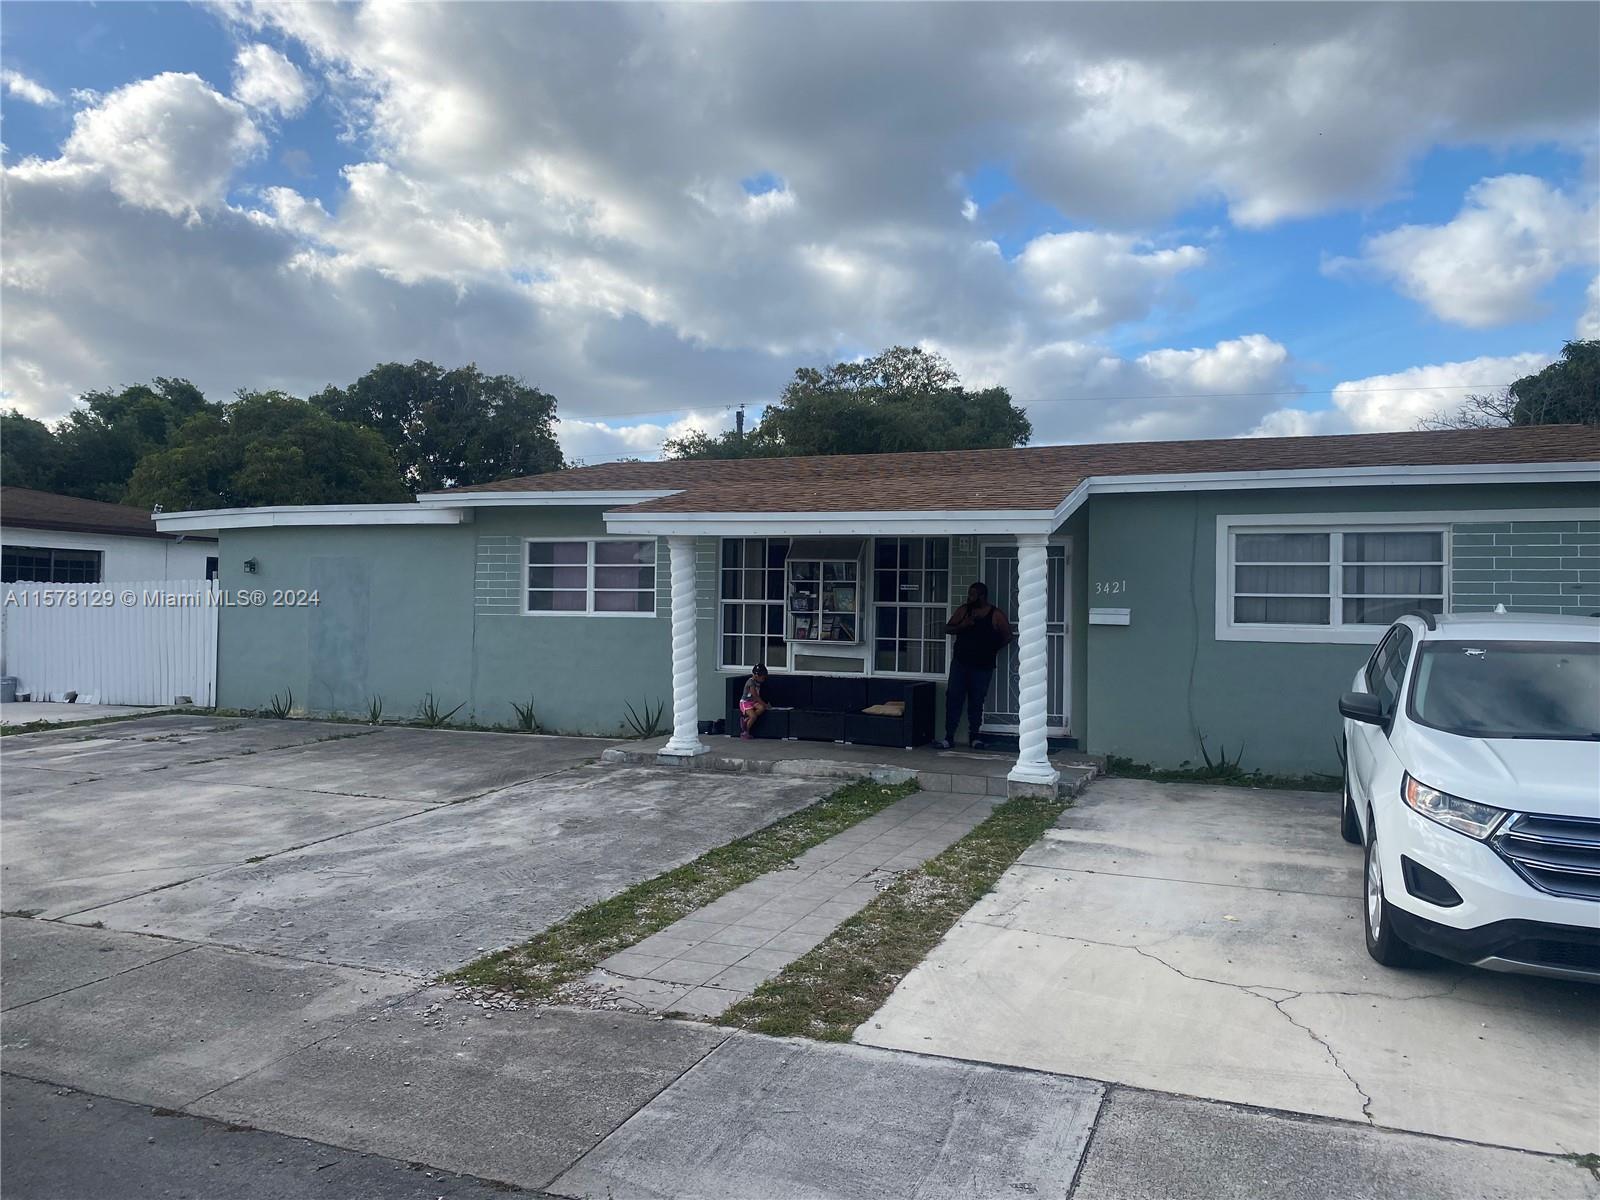 Photo of 3421 NW 176th St in Miami Gardens, FL